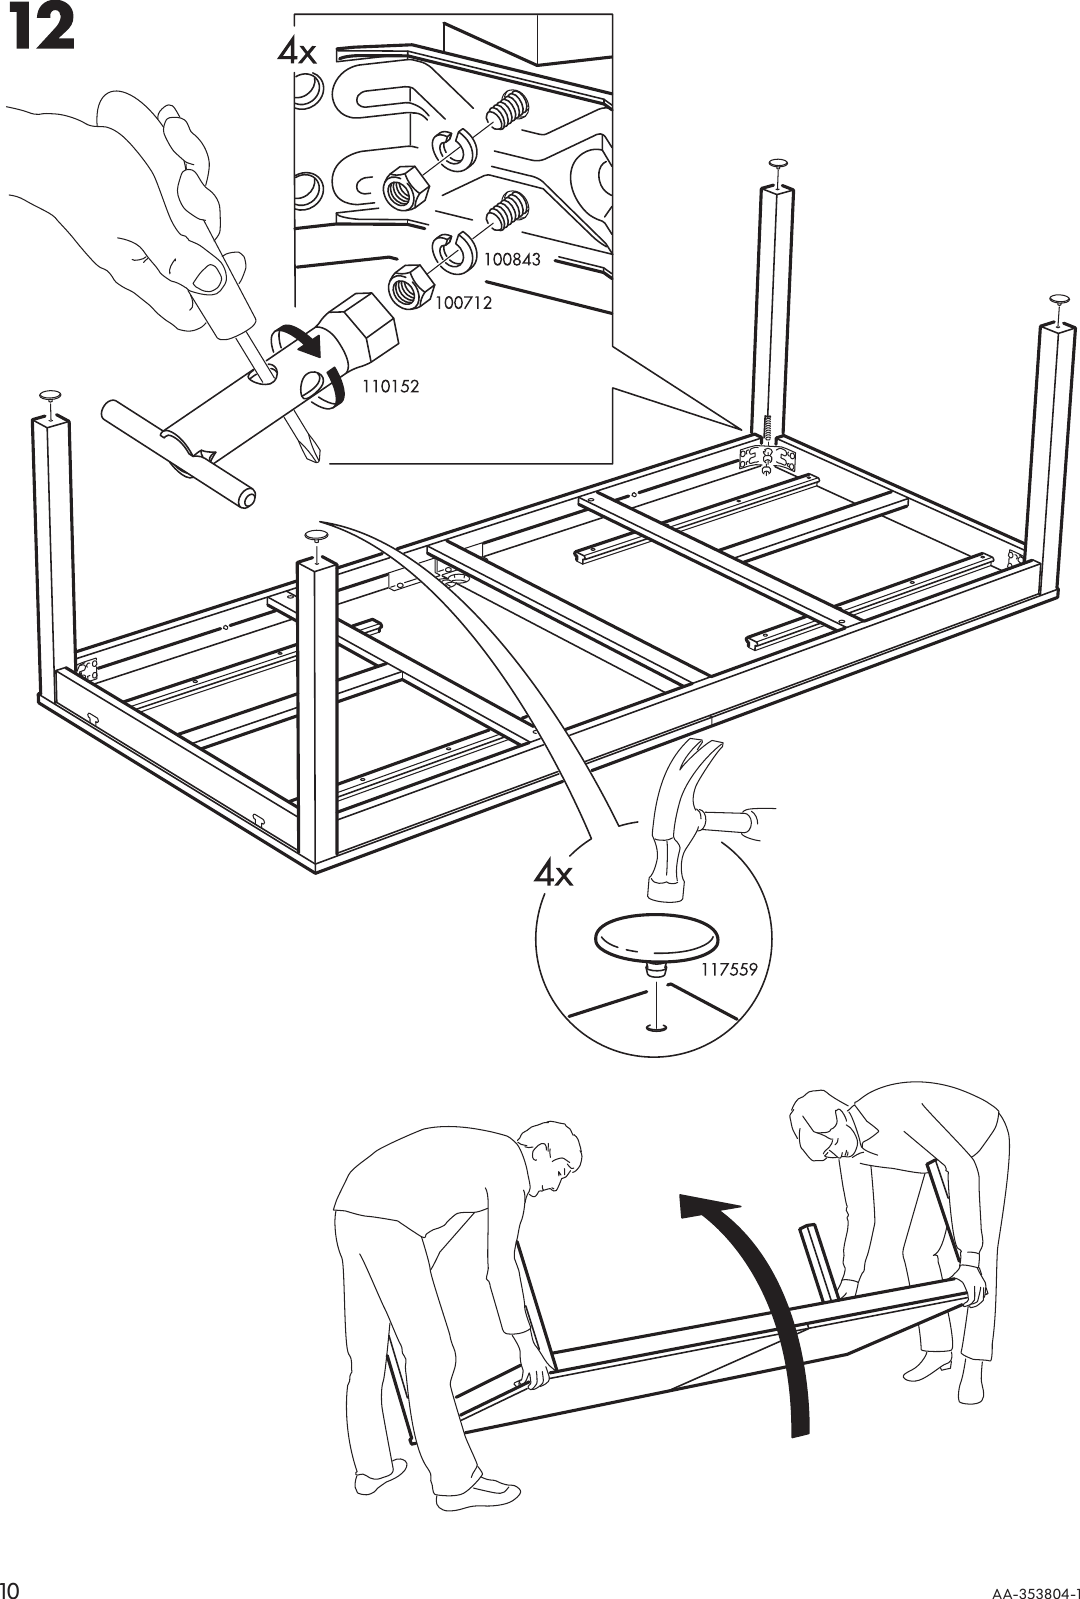 Page 10 of 12 - Ikea Ikea-Bjursta-Extendable-Dining-Table-94-114-133X43-Assembly-Instruction